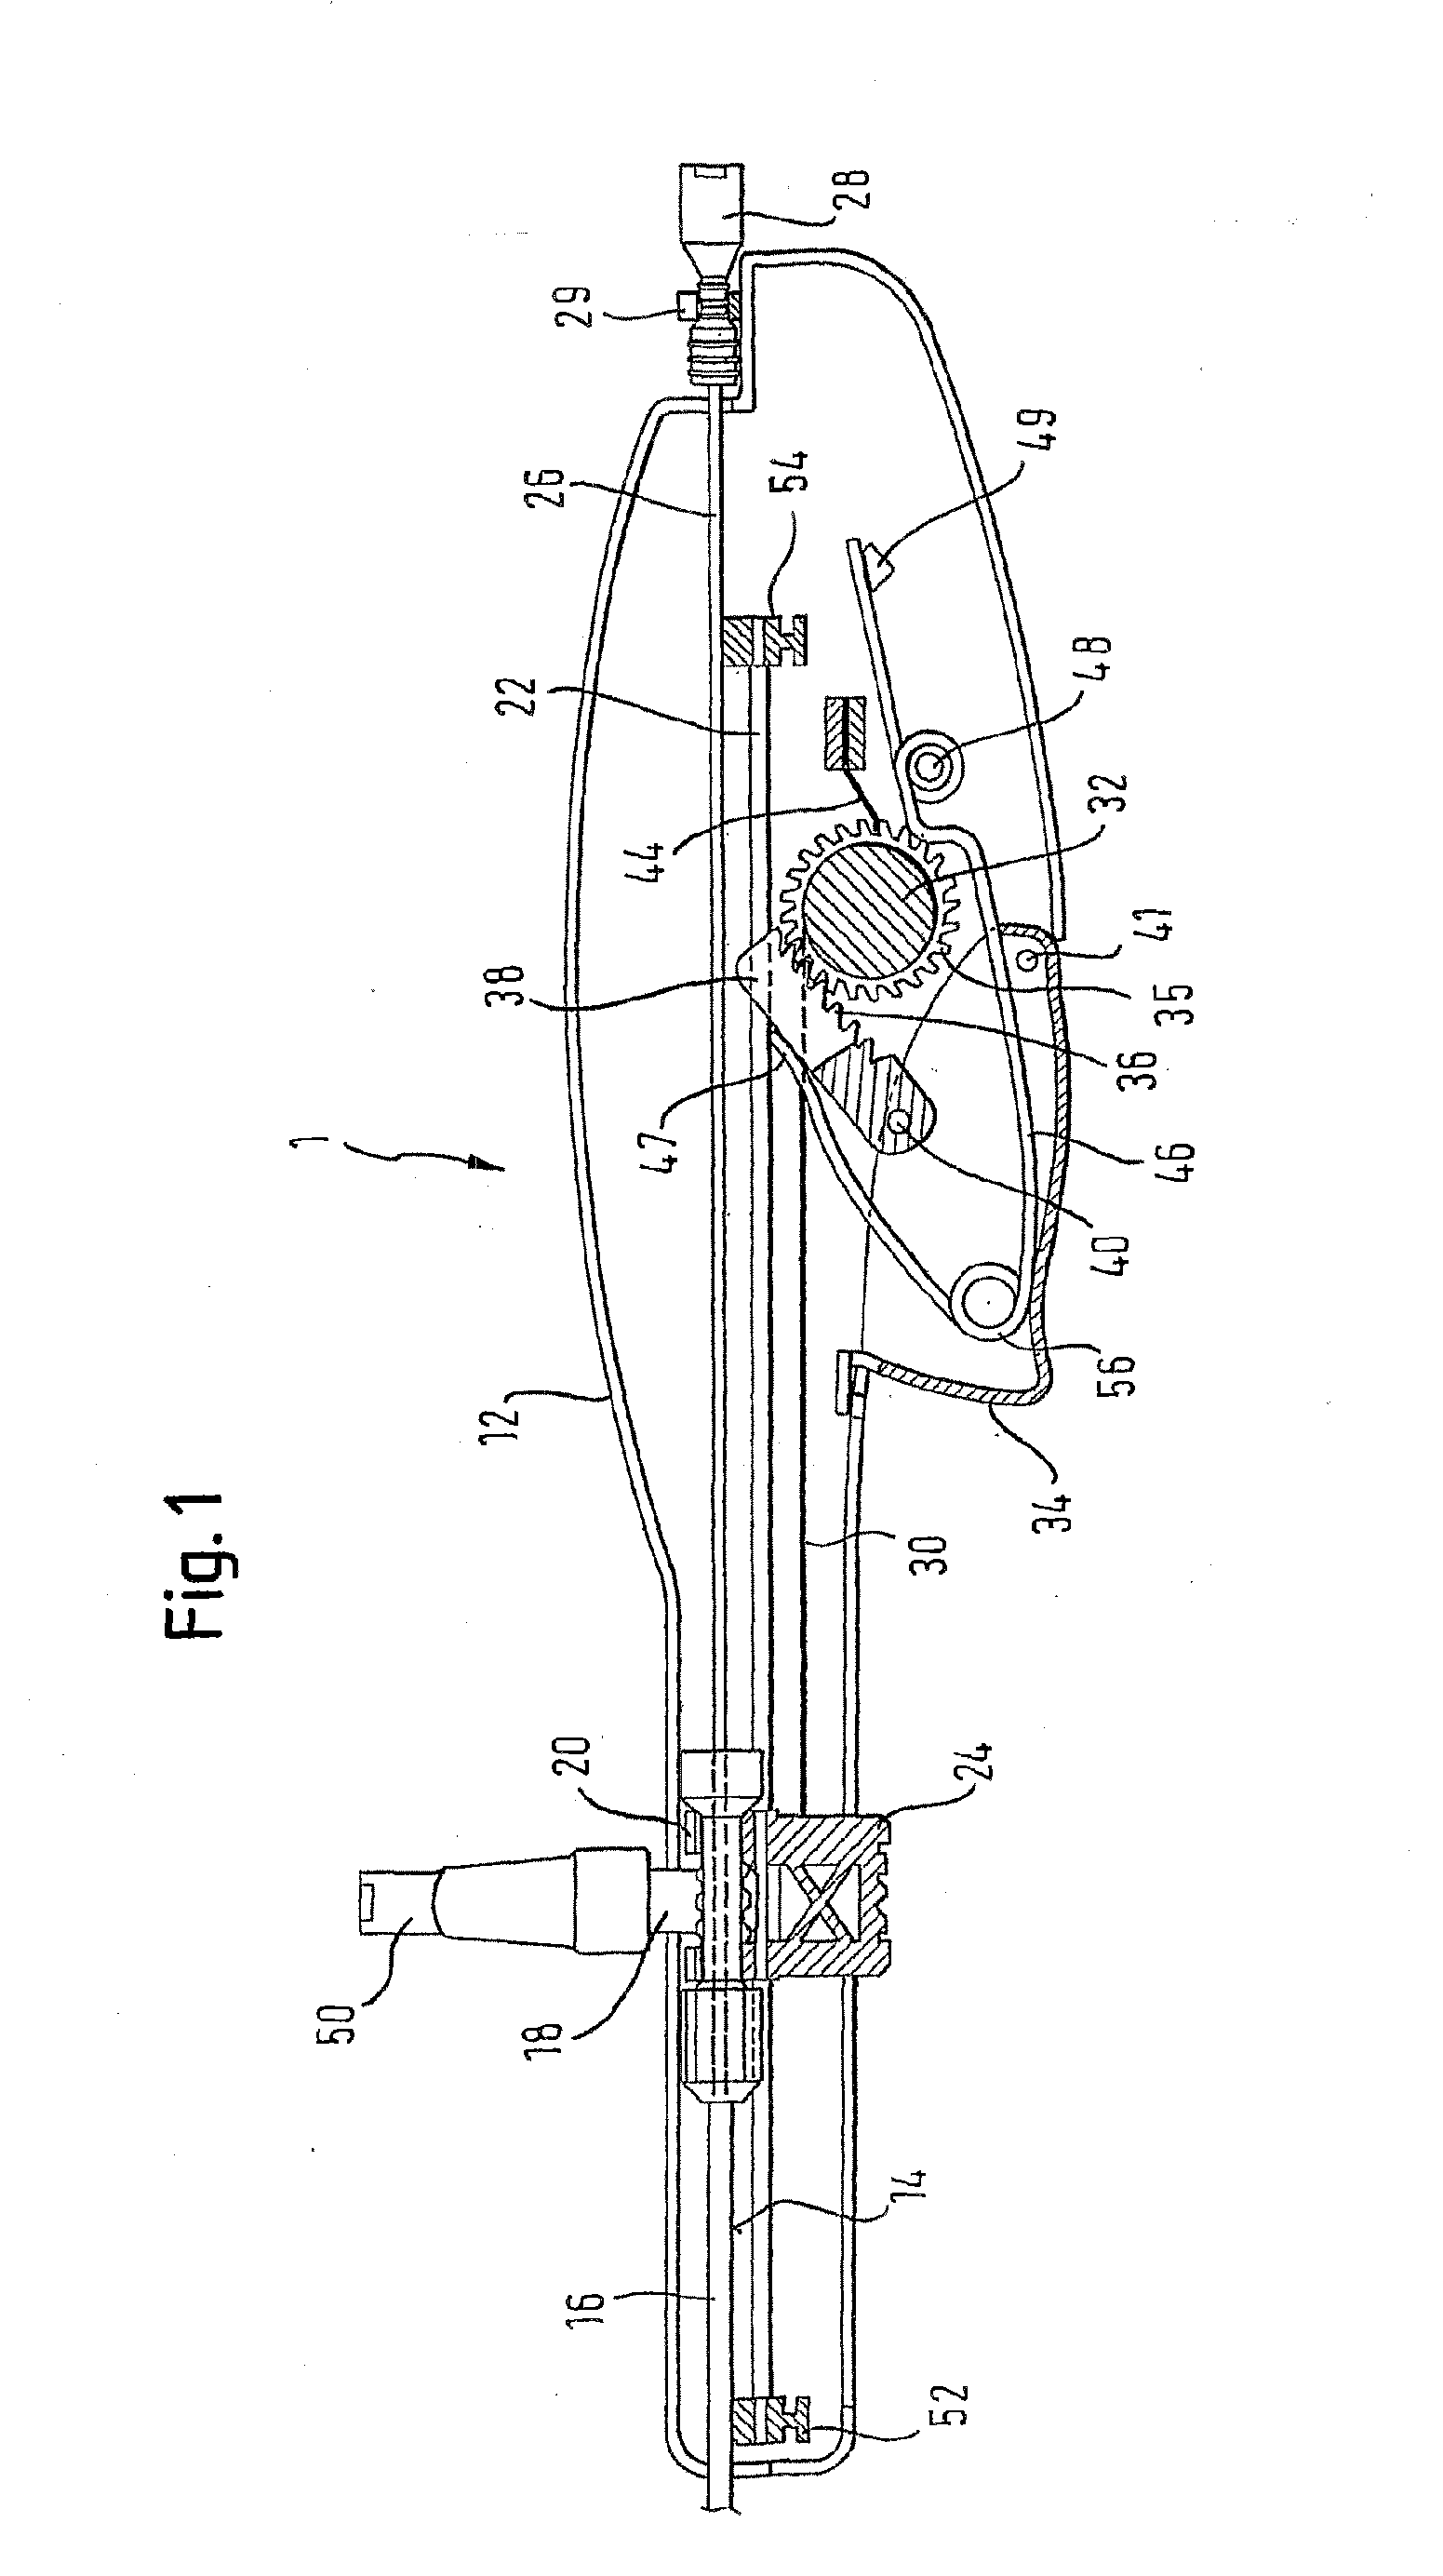 Variable speed self-expanding stent delivery system and luer locking connector